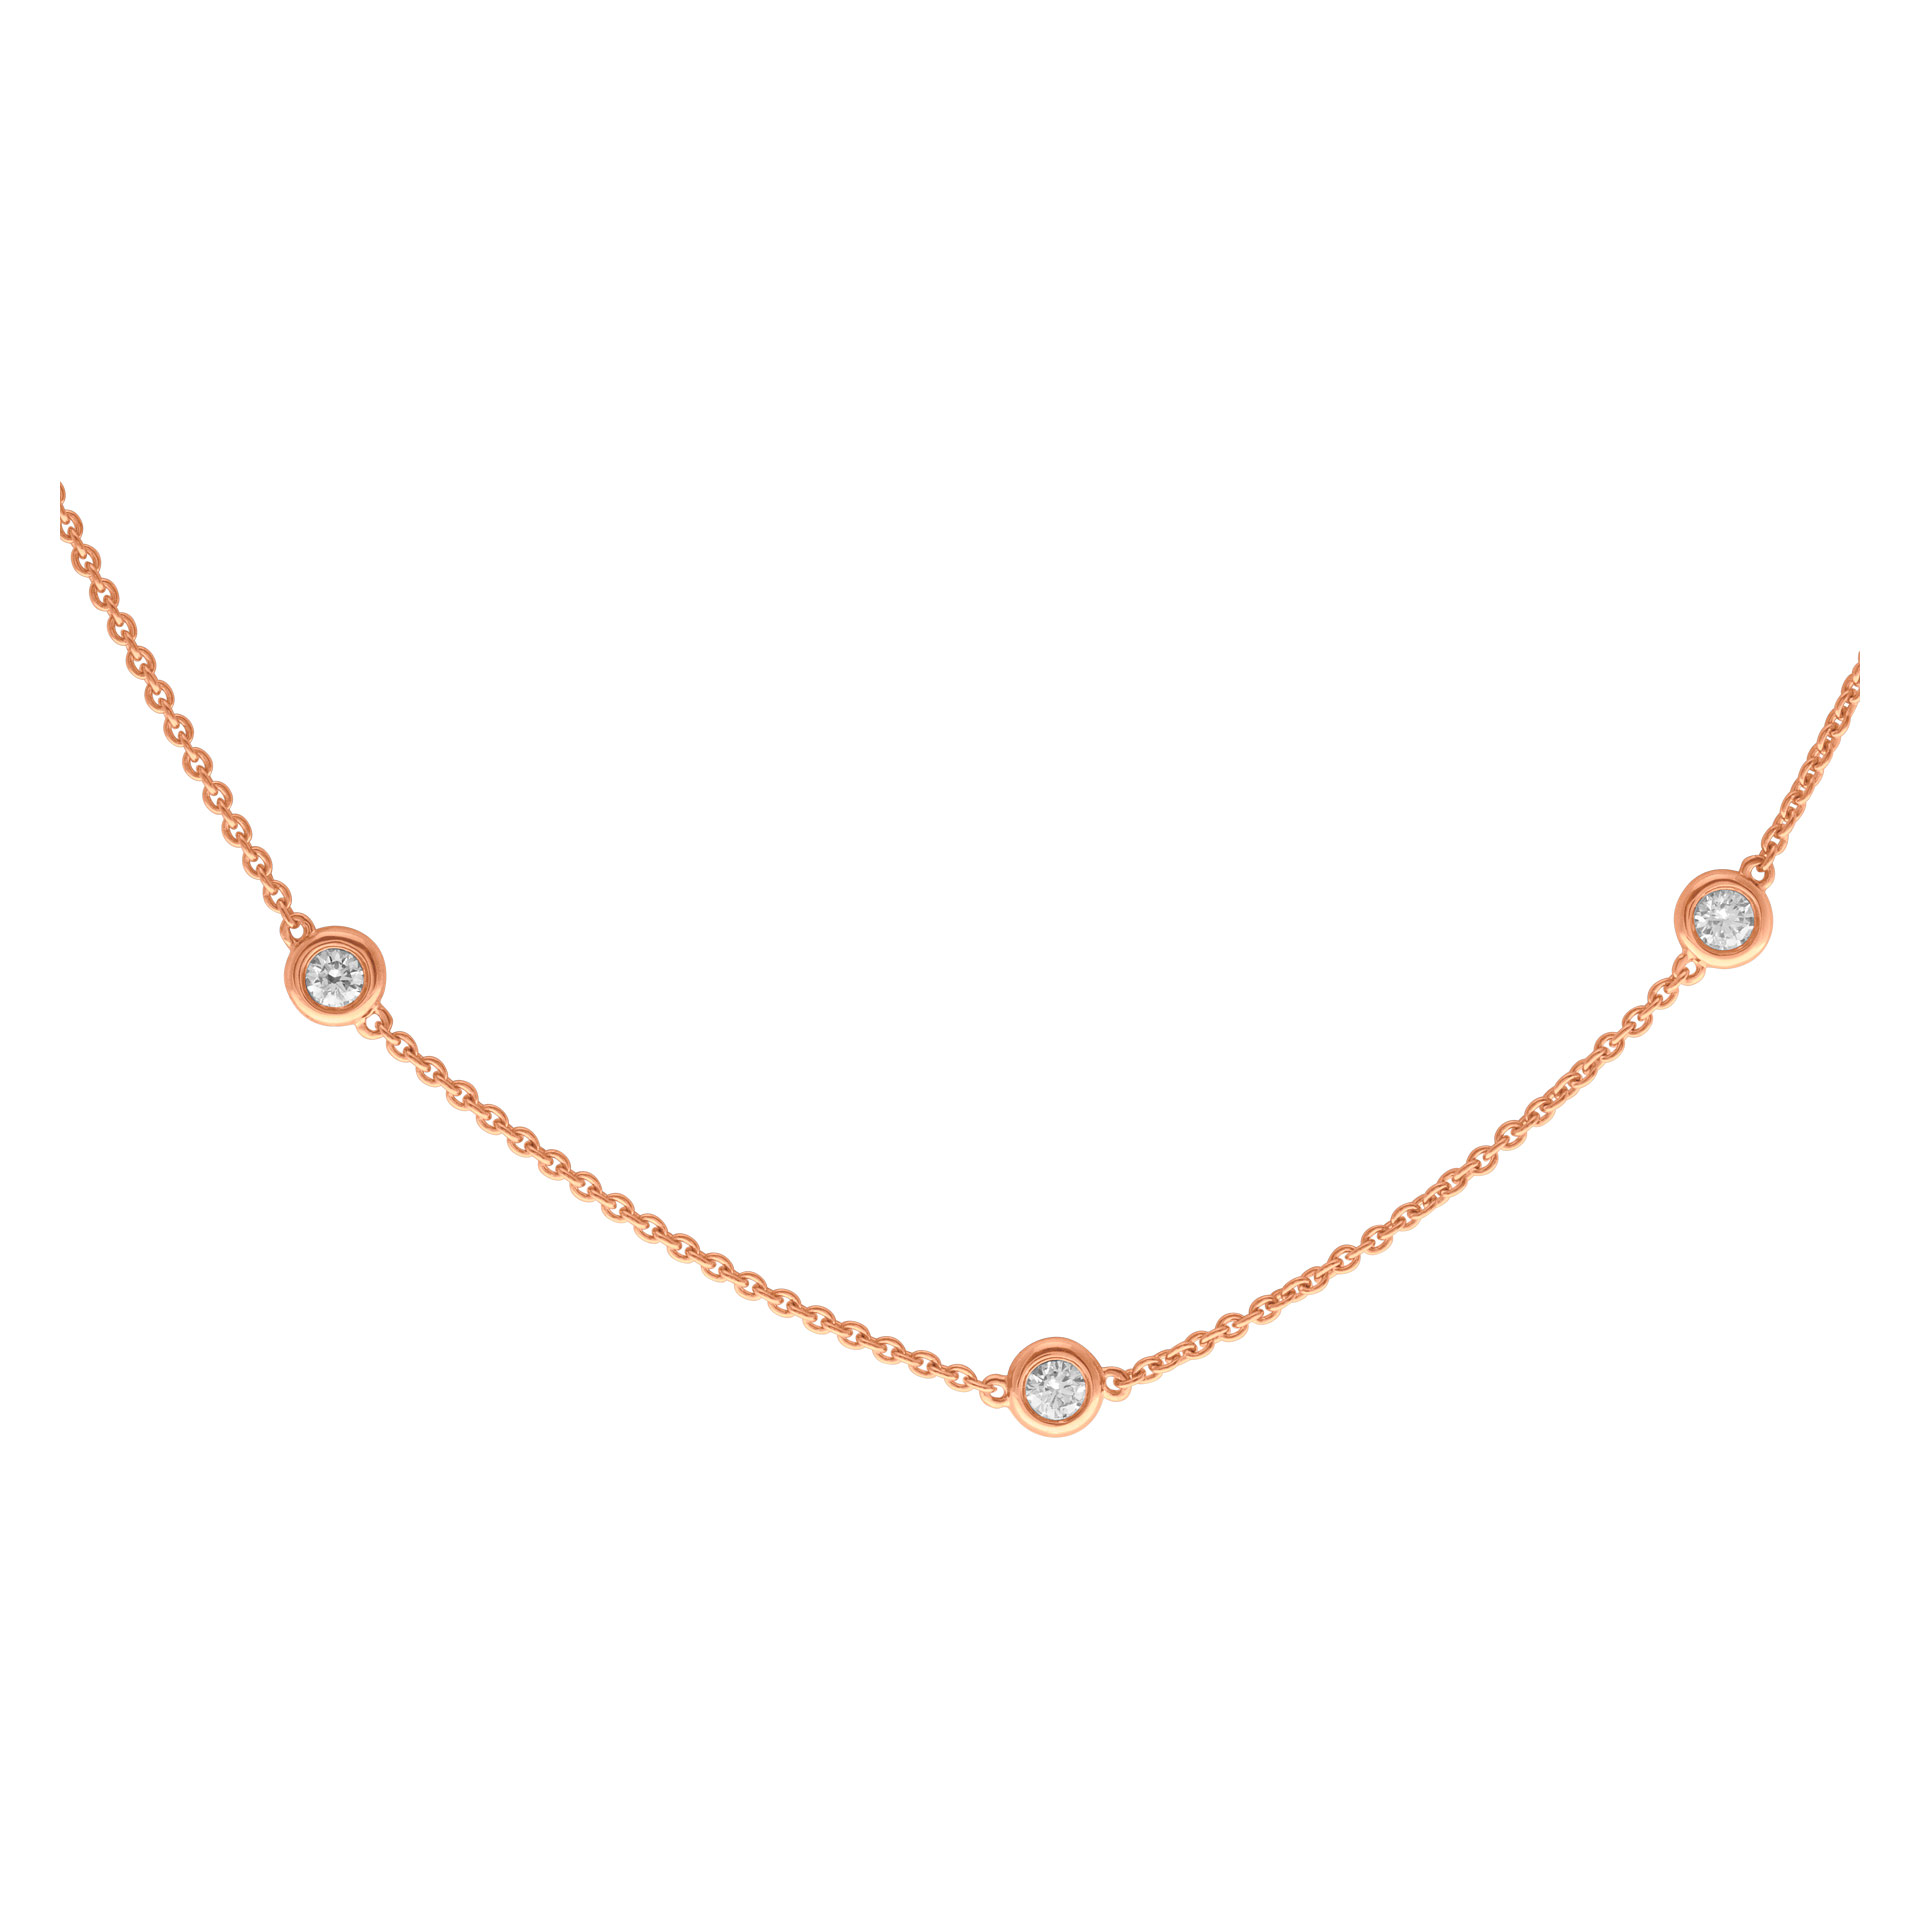 Diamonds by the yard 14k rose gold 2.25 carats in diamonds image 1